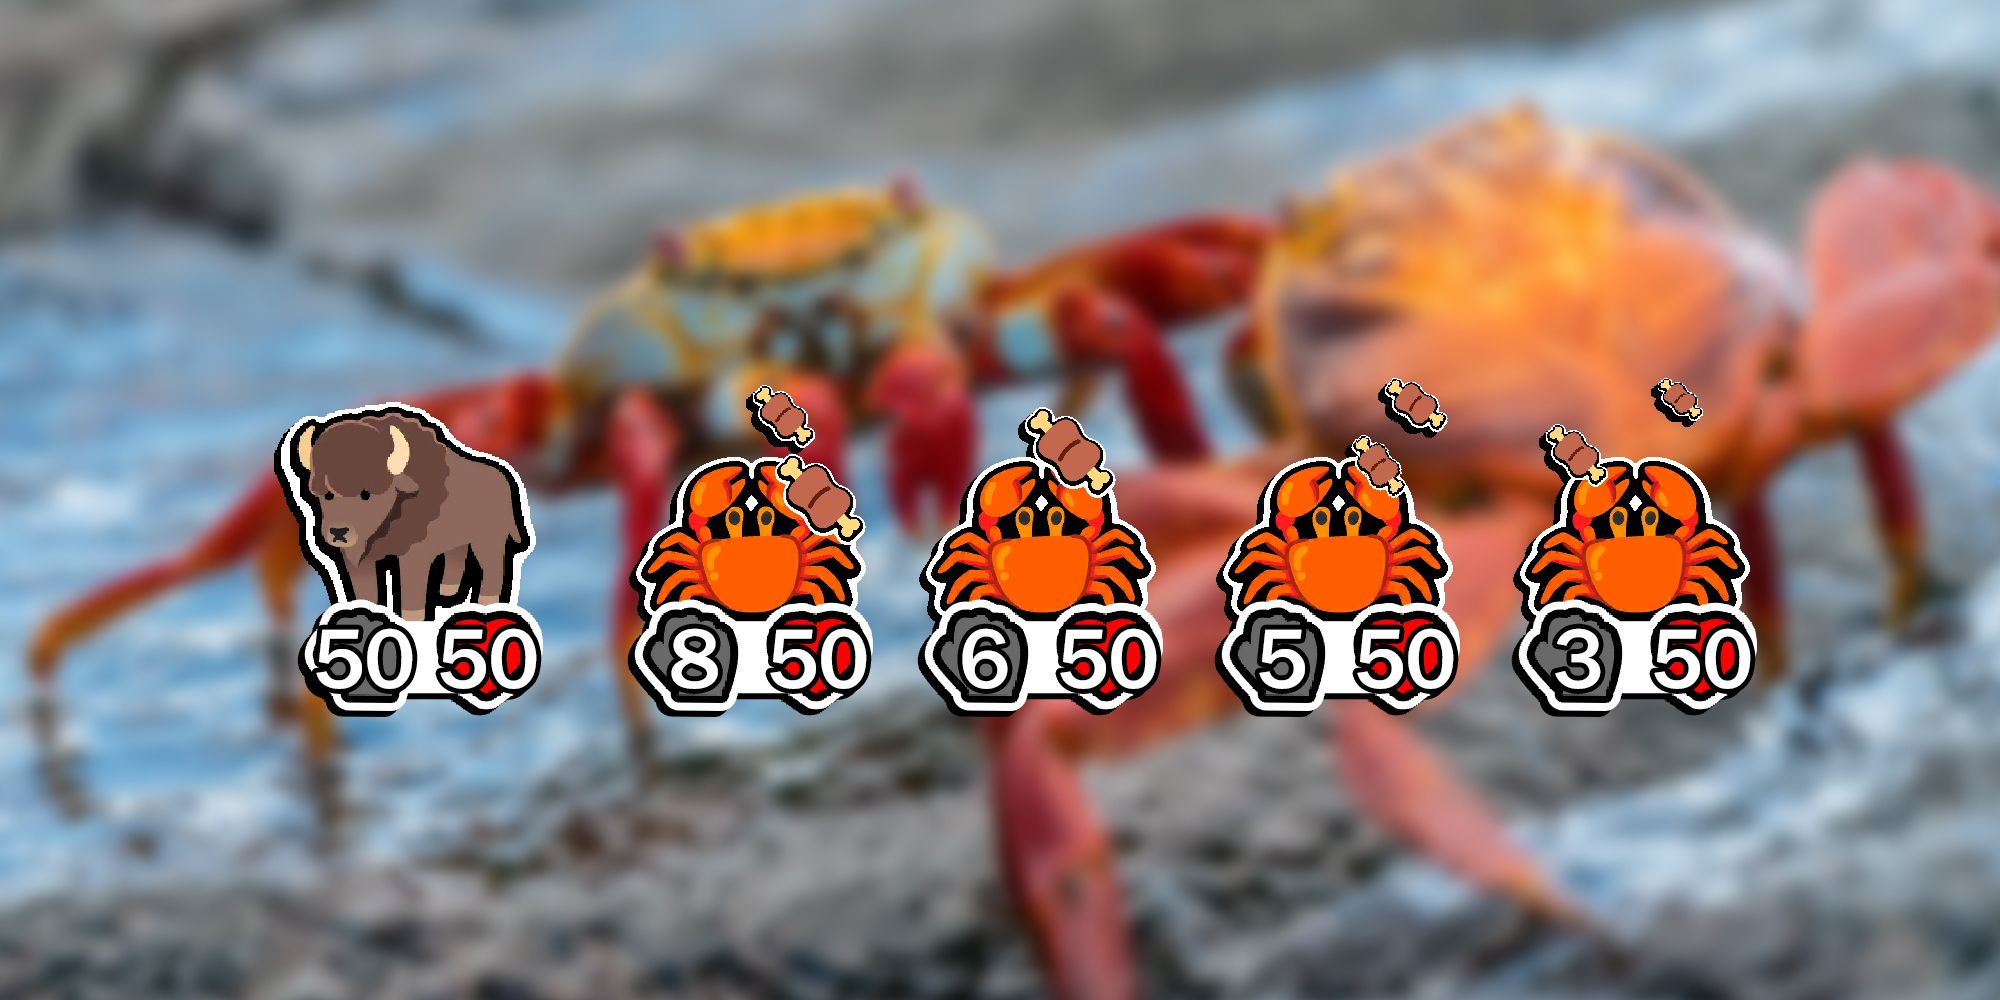 Super Auto Pets - PNG Of 50 Hp 50 Pow Bison With 4 Crabs Behind It Overlaid On Image Of Two Crabs